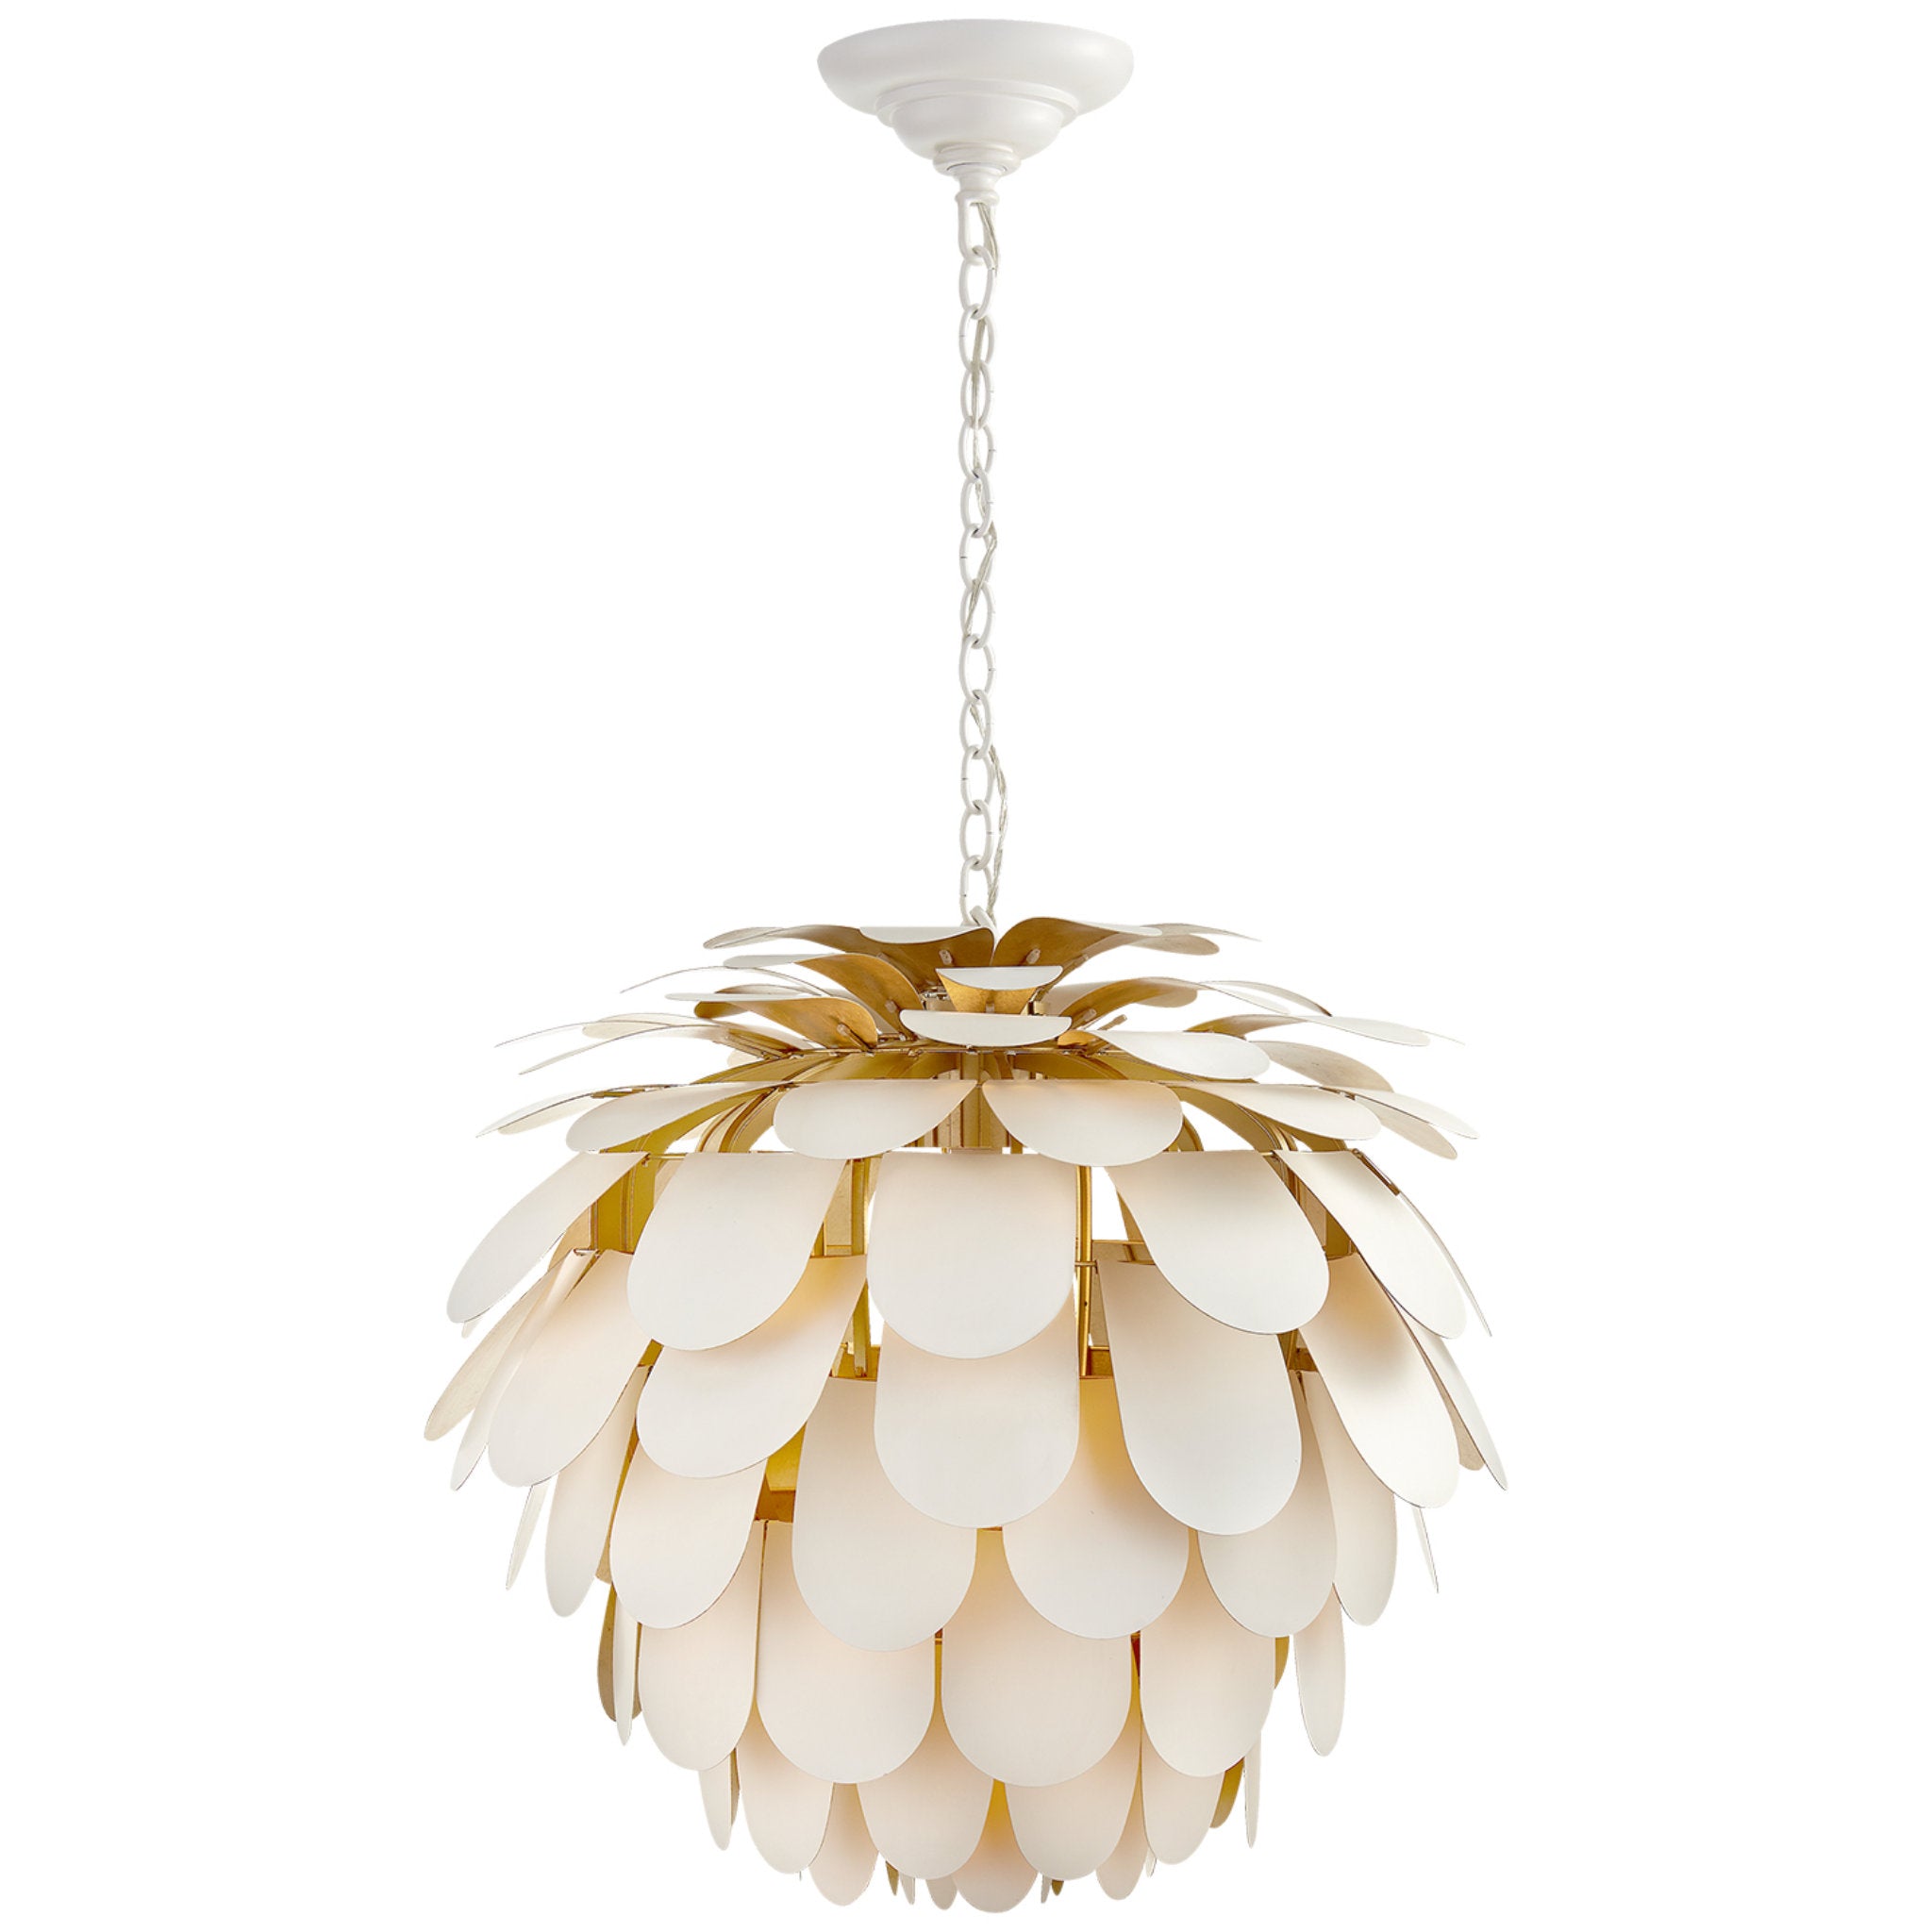 Chapman & Myers Cynara Large Chandelier in White and Gild